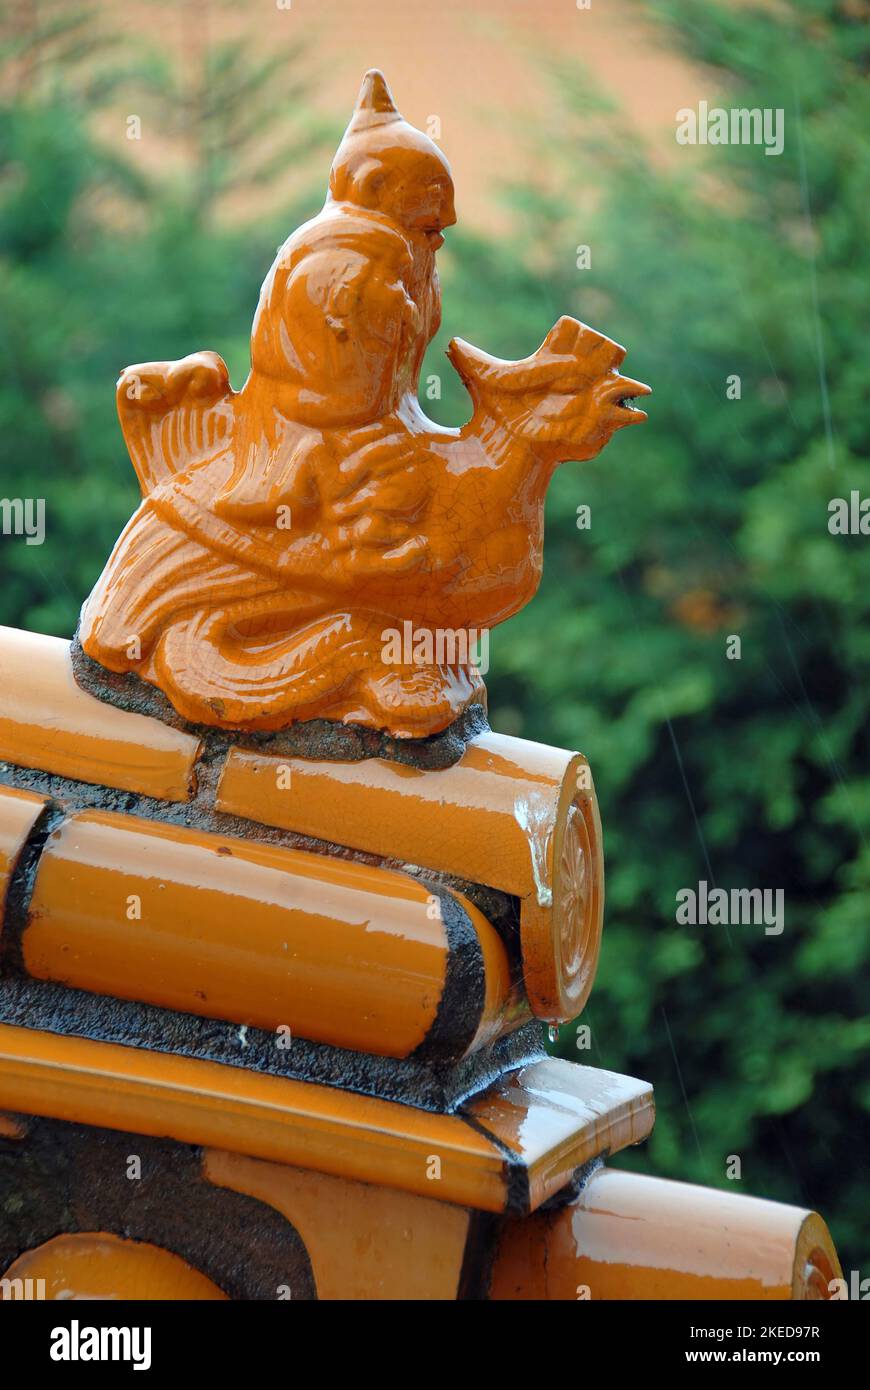 Decorative finial on a roof at the Fo Guang Shan Nan Tien Temple, a Buddhist temple at Berkeley near Wollongong, Australia. Stock Photo